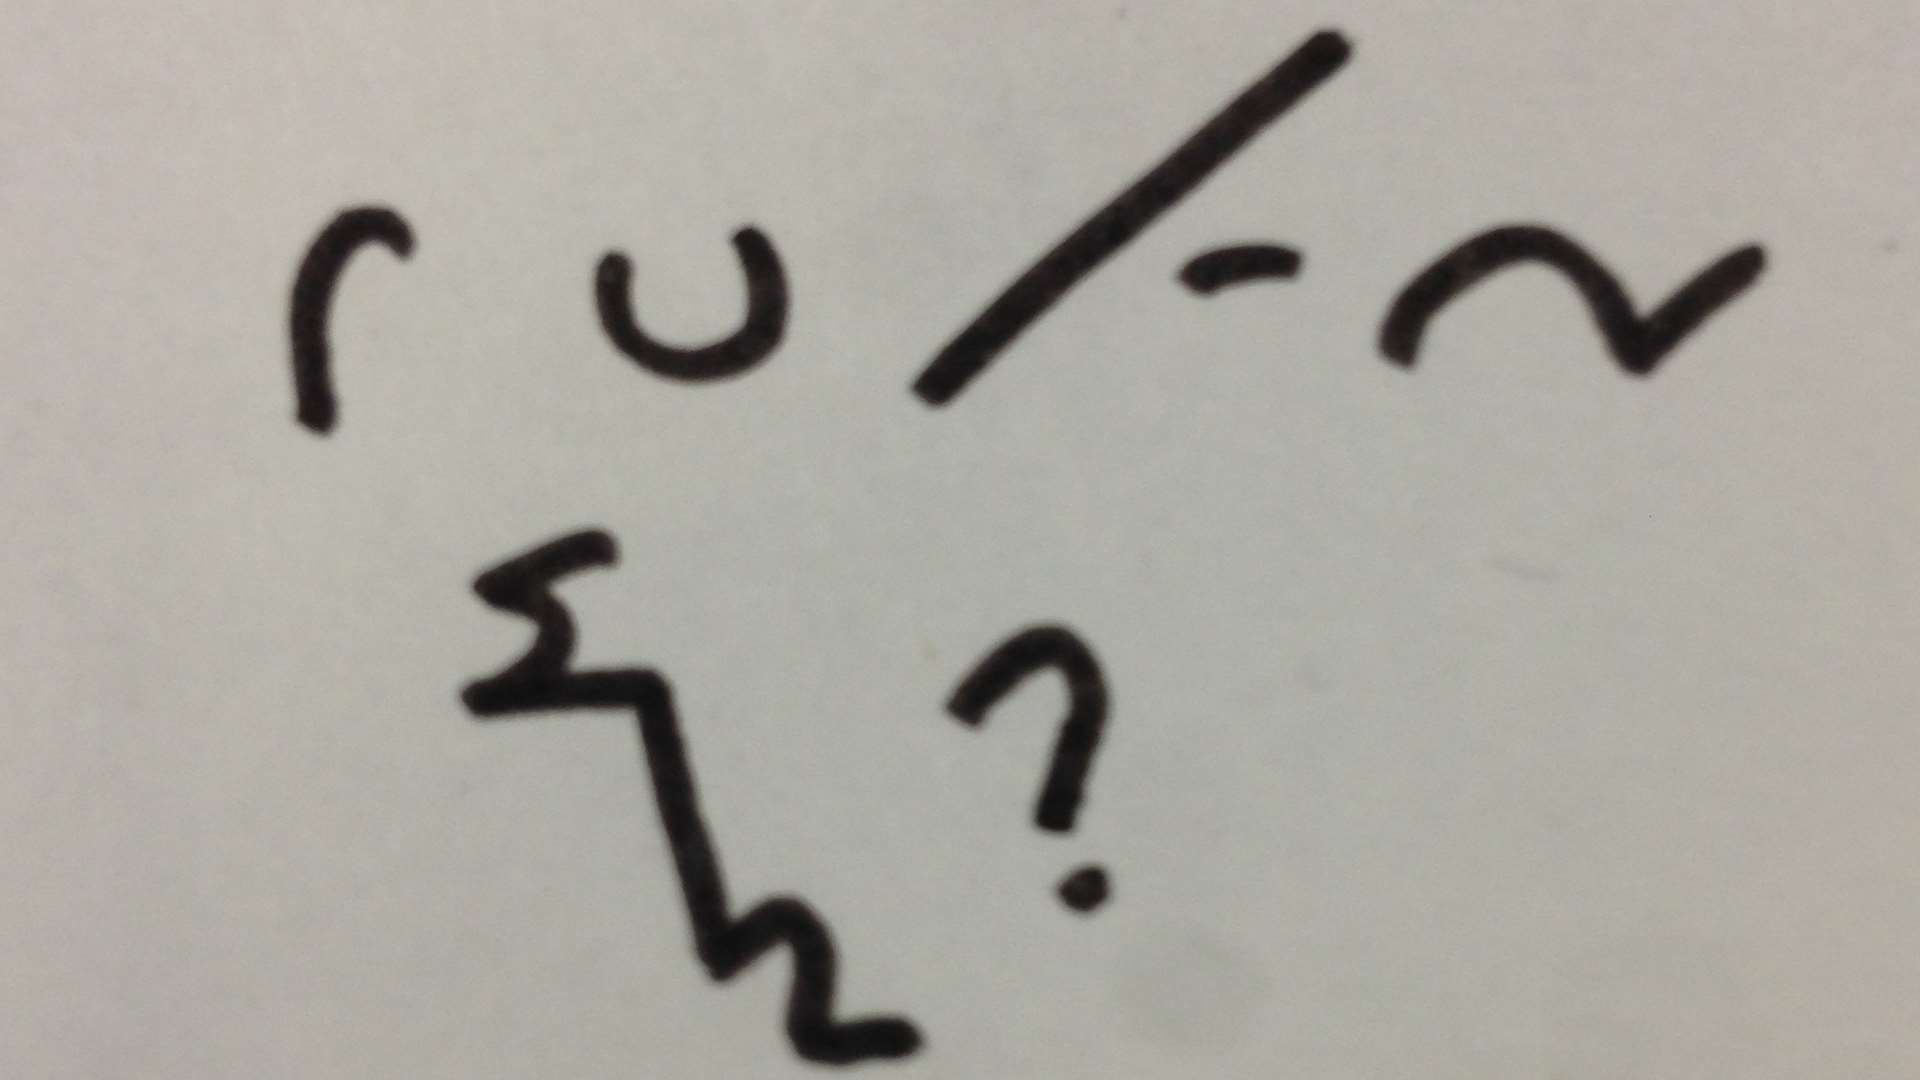 What does this say?